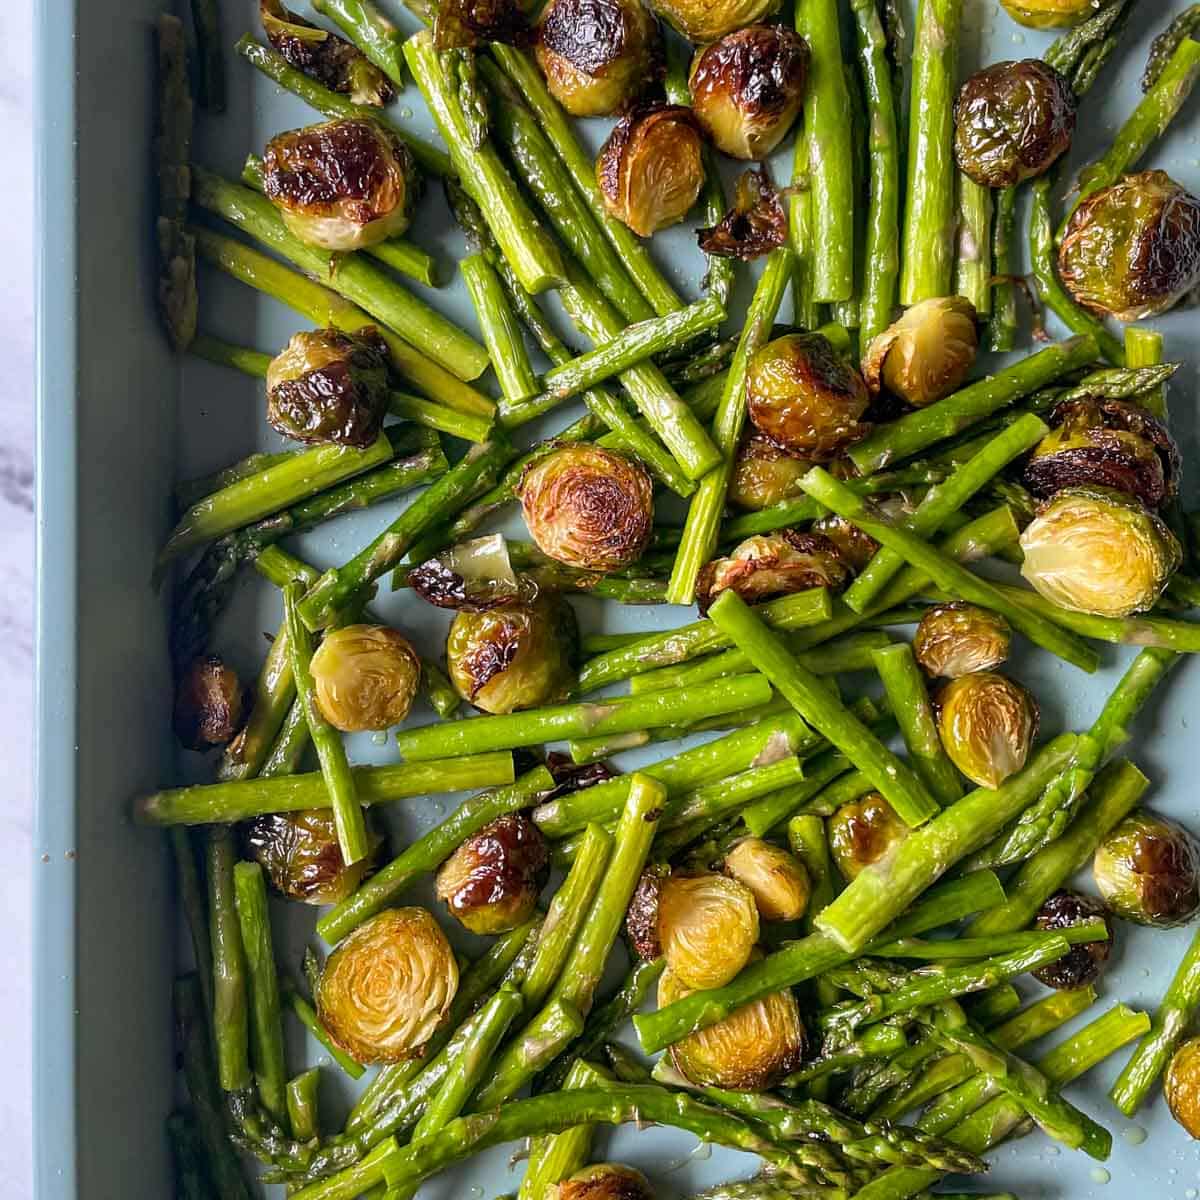 Roasted brussels sprouts and asparagus sit on a blue sheet tray.